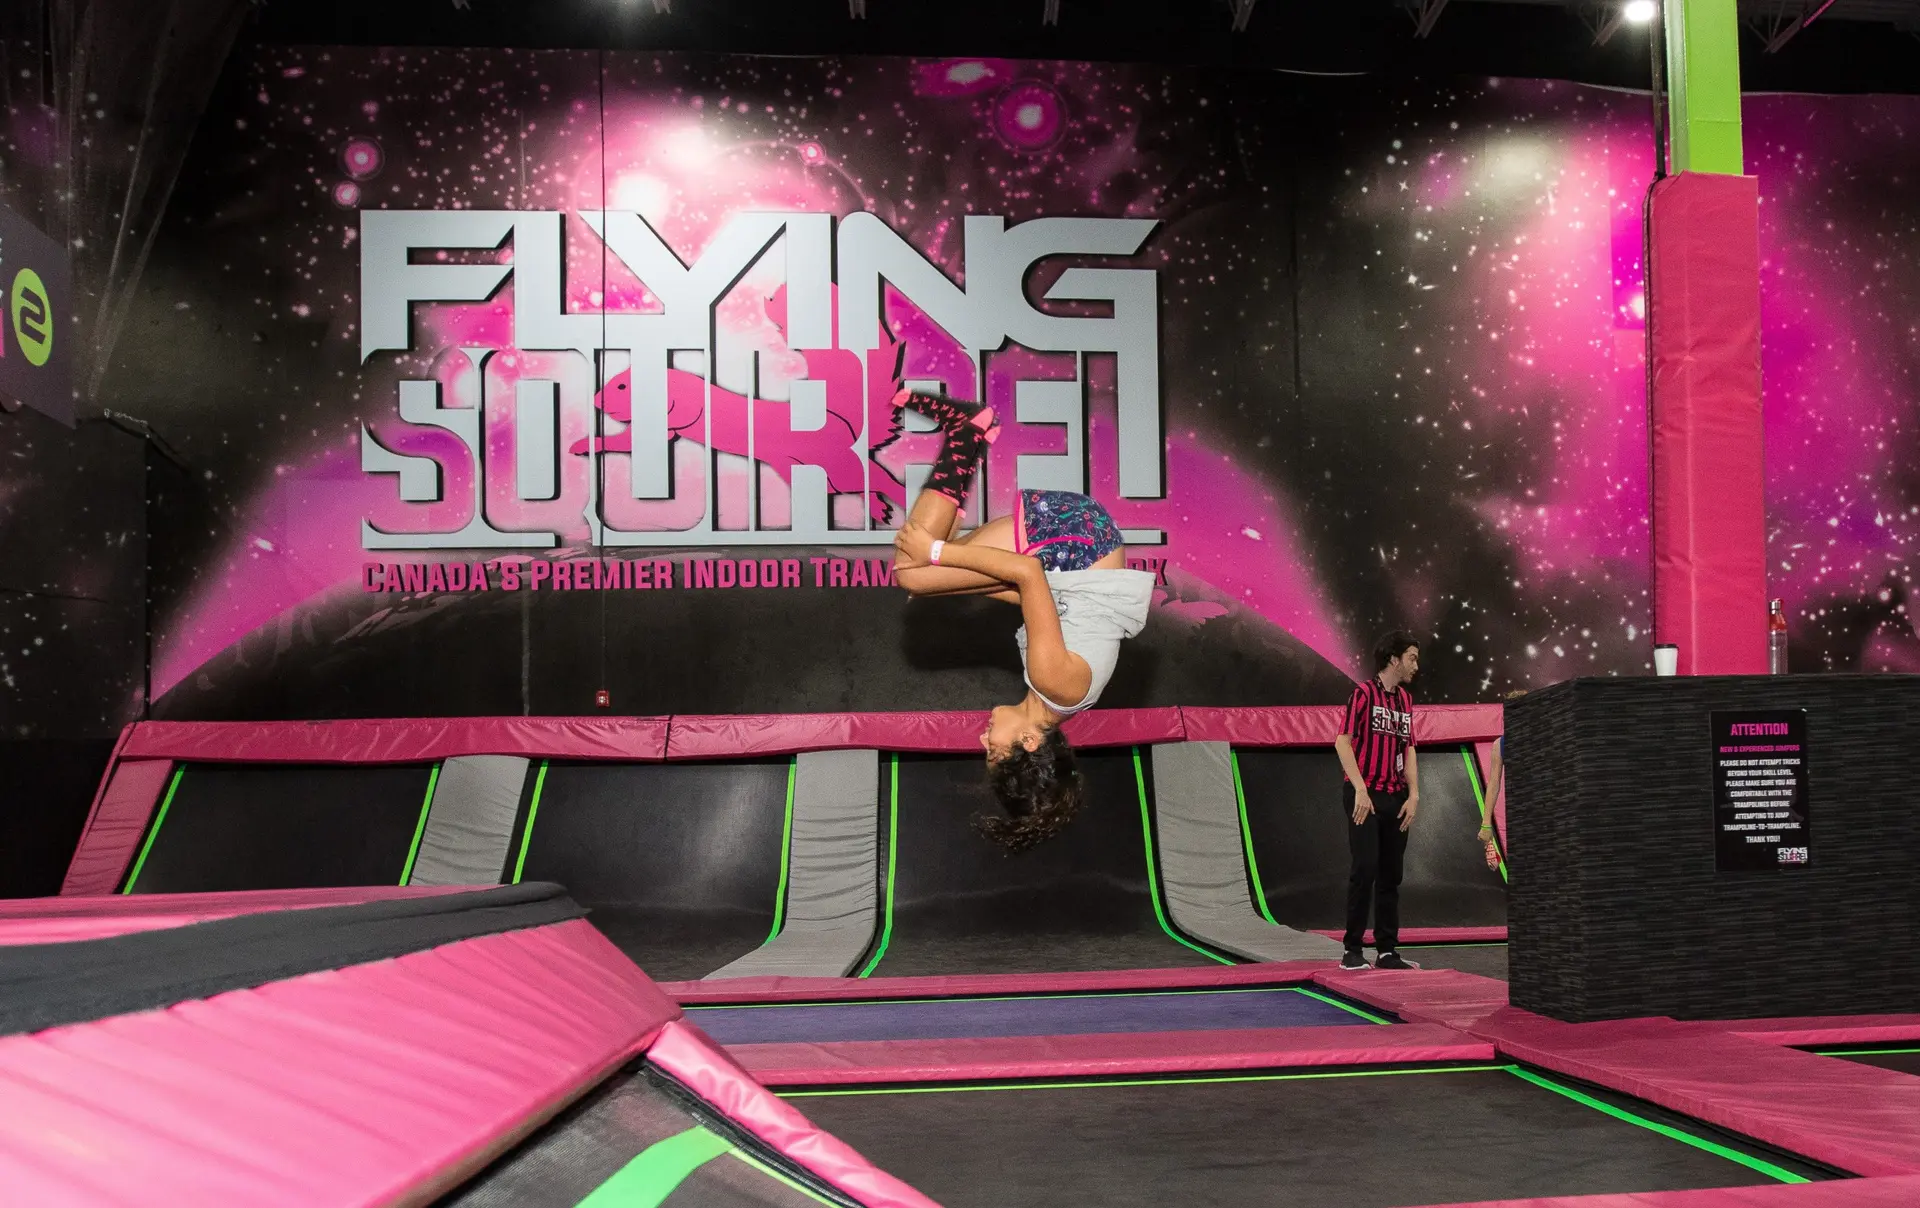 A child flips over in the air during a fun session at Flying Squirrel trampoline park